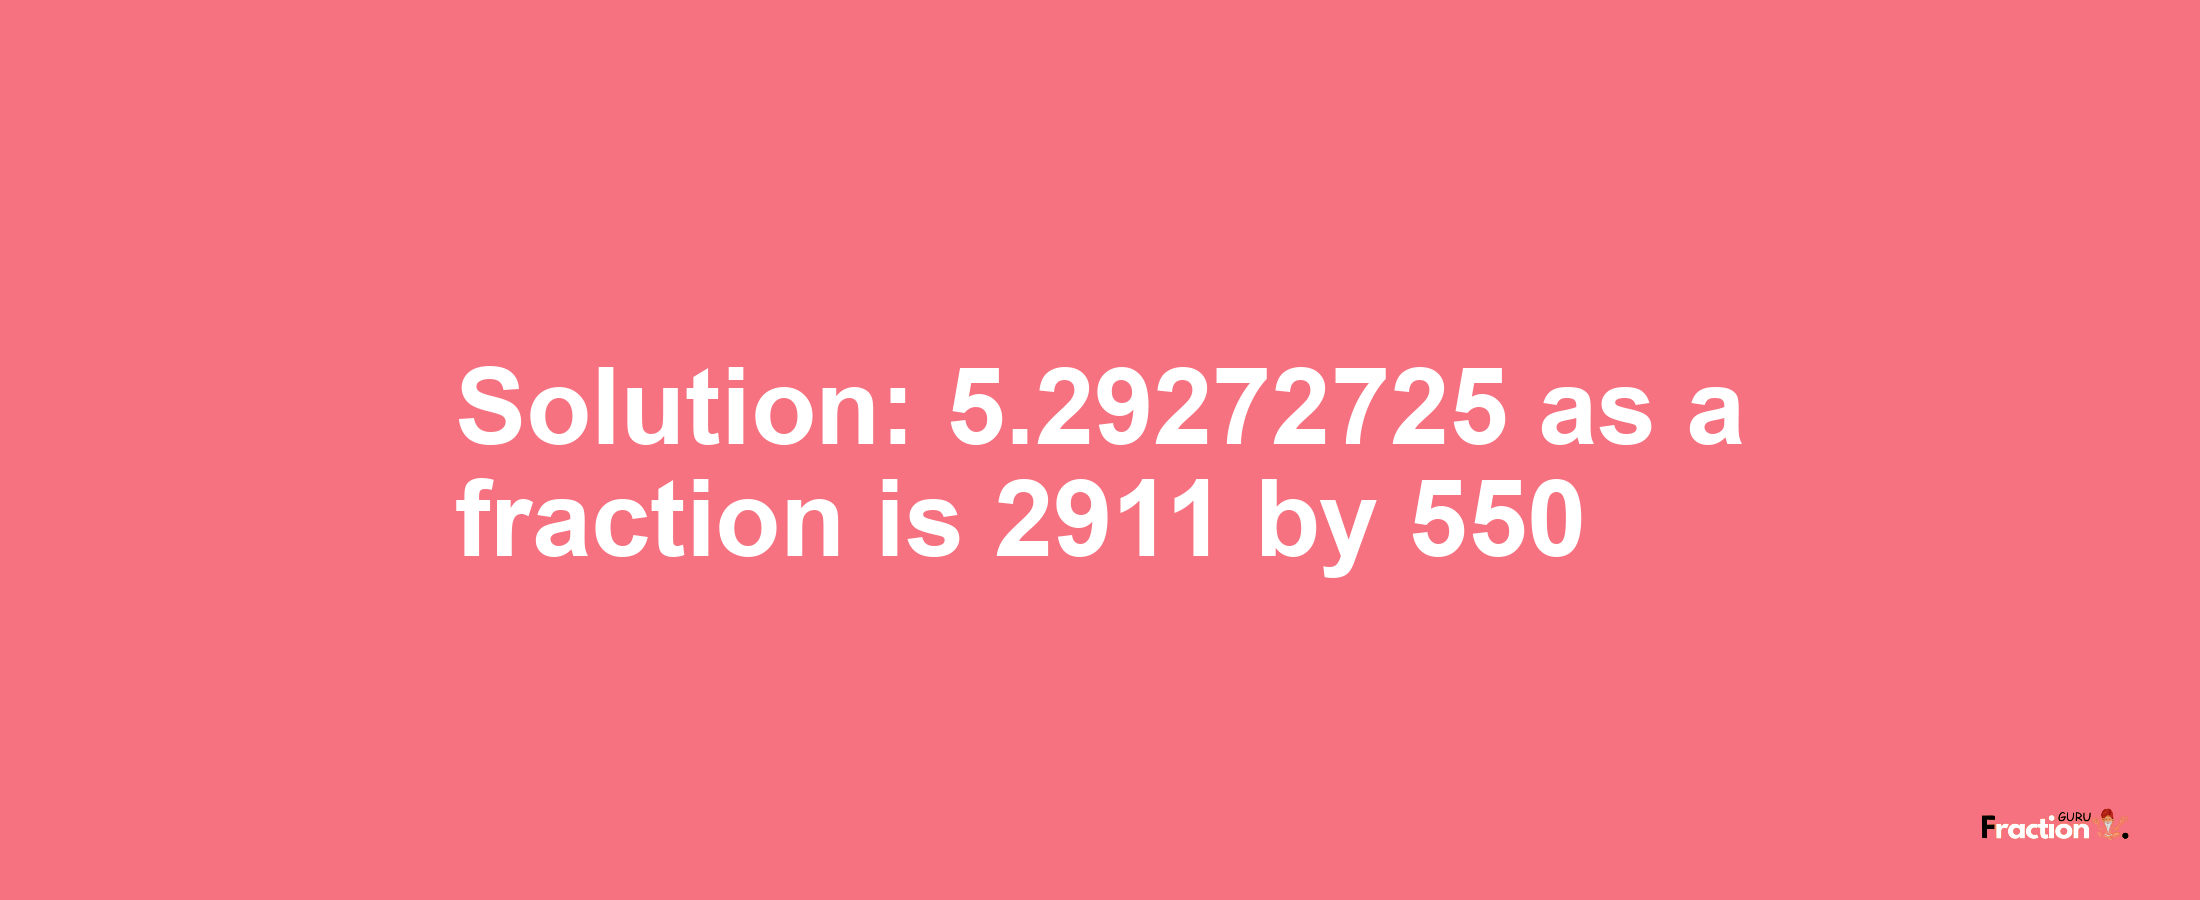 Solution:5.29272725 as a fraction is 2911/550